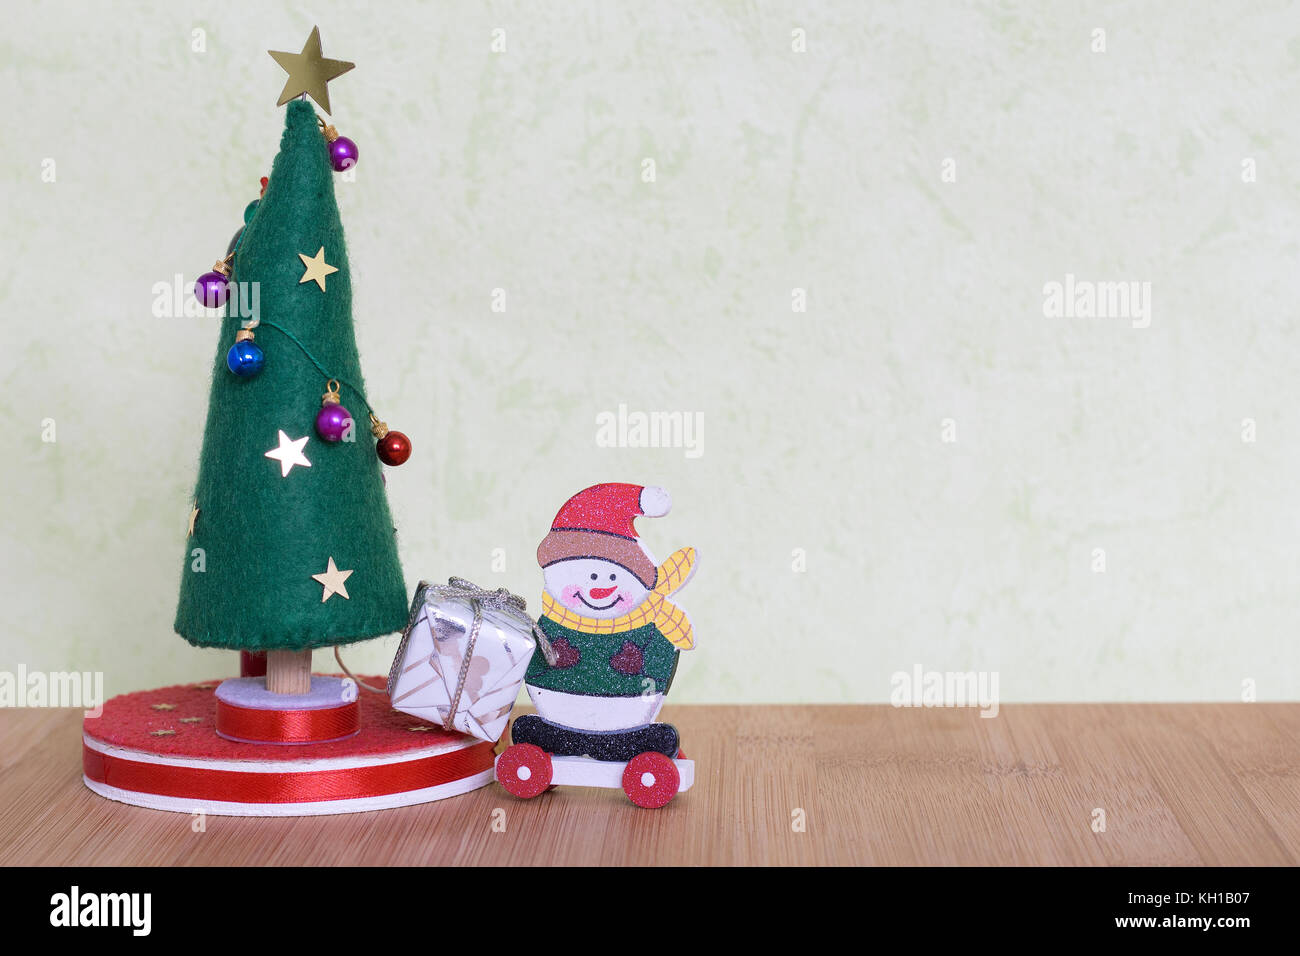 a Christmas tree toy with a lady decorating with colorful balls, gifts and snowmen Stock Photo